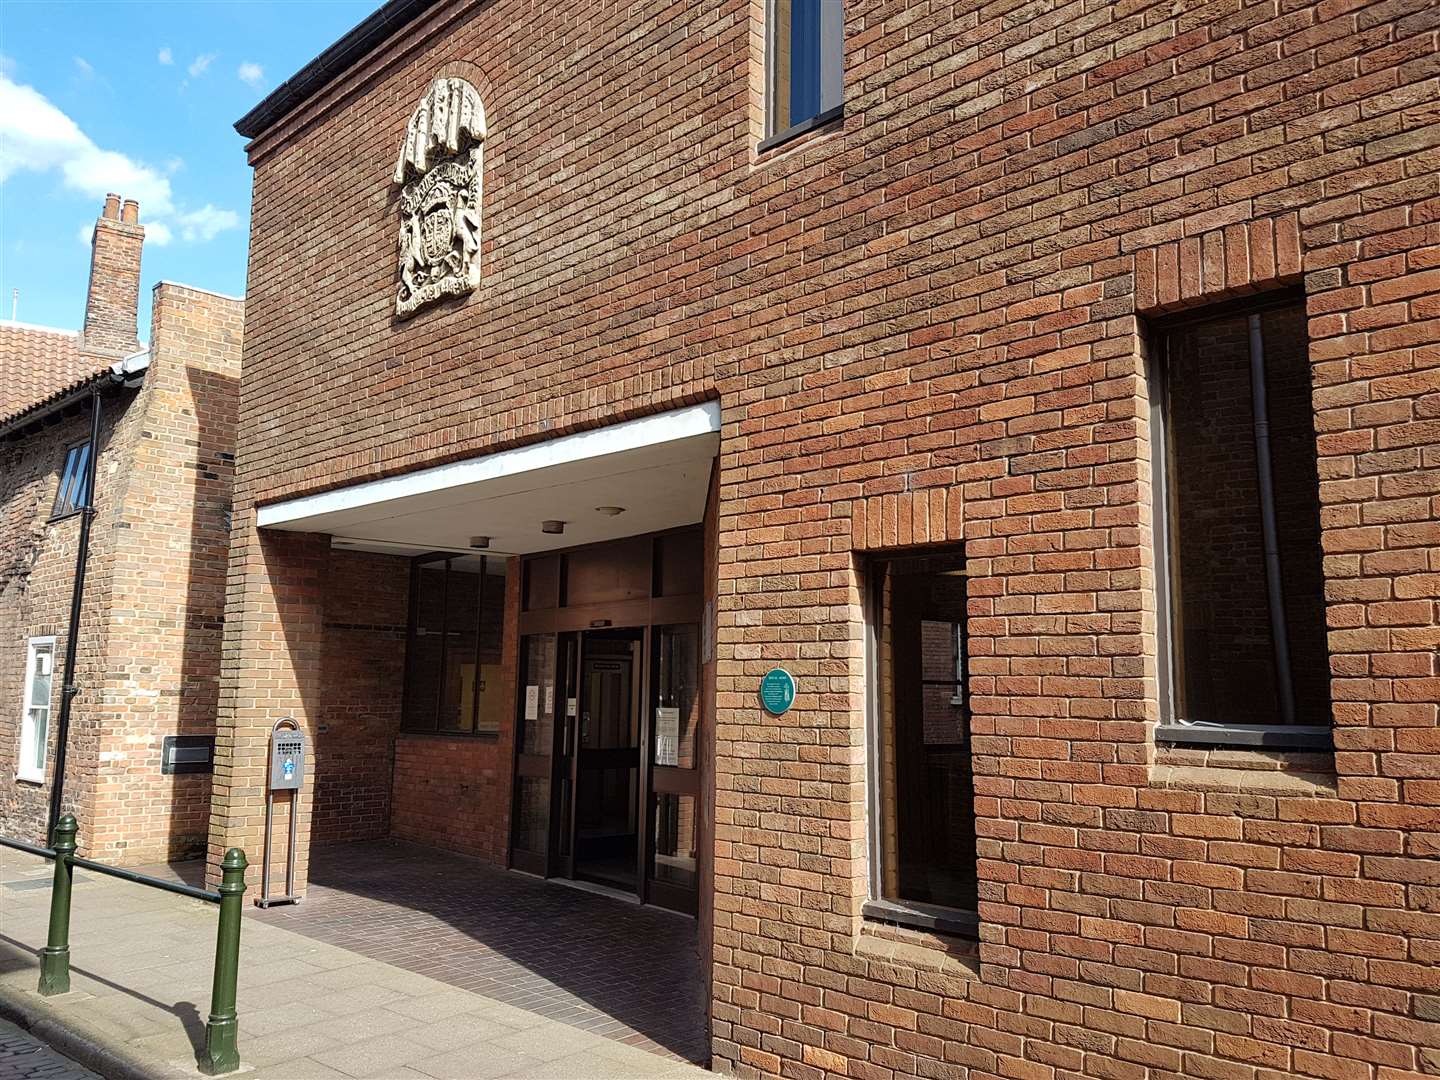 Cross was at Lynn Magistrates’ Court on Thursday